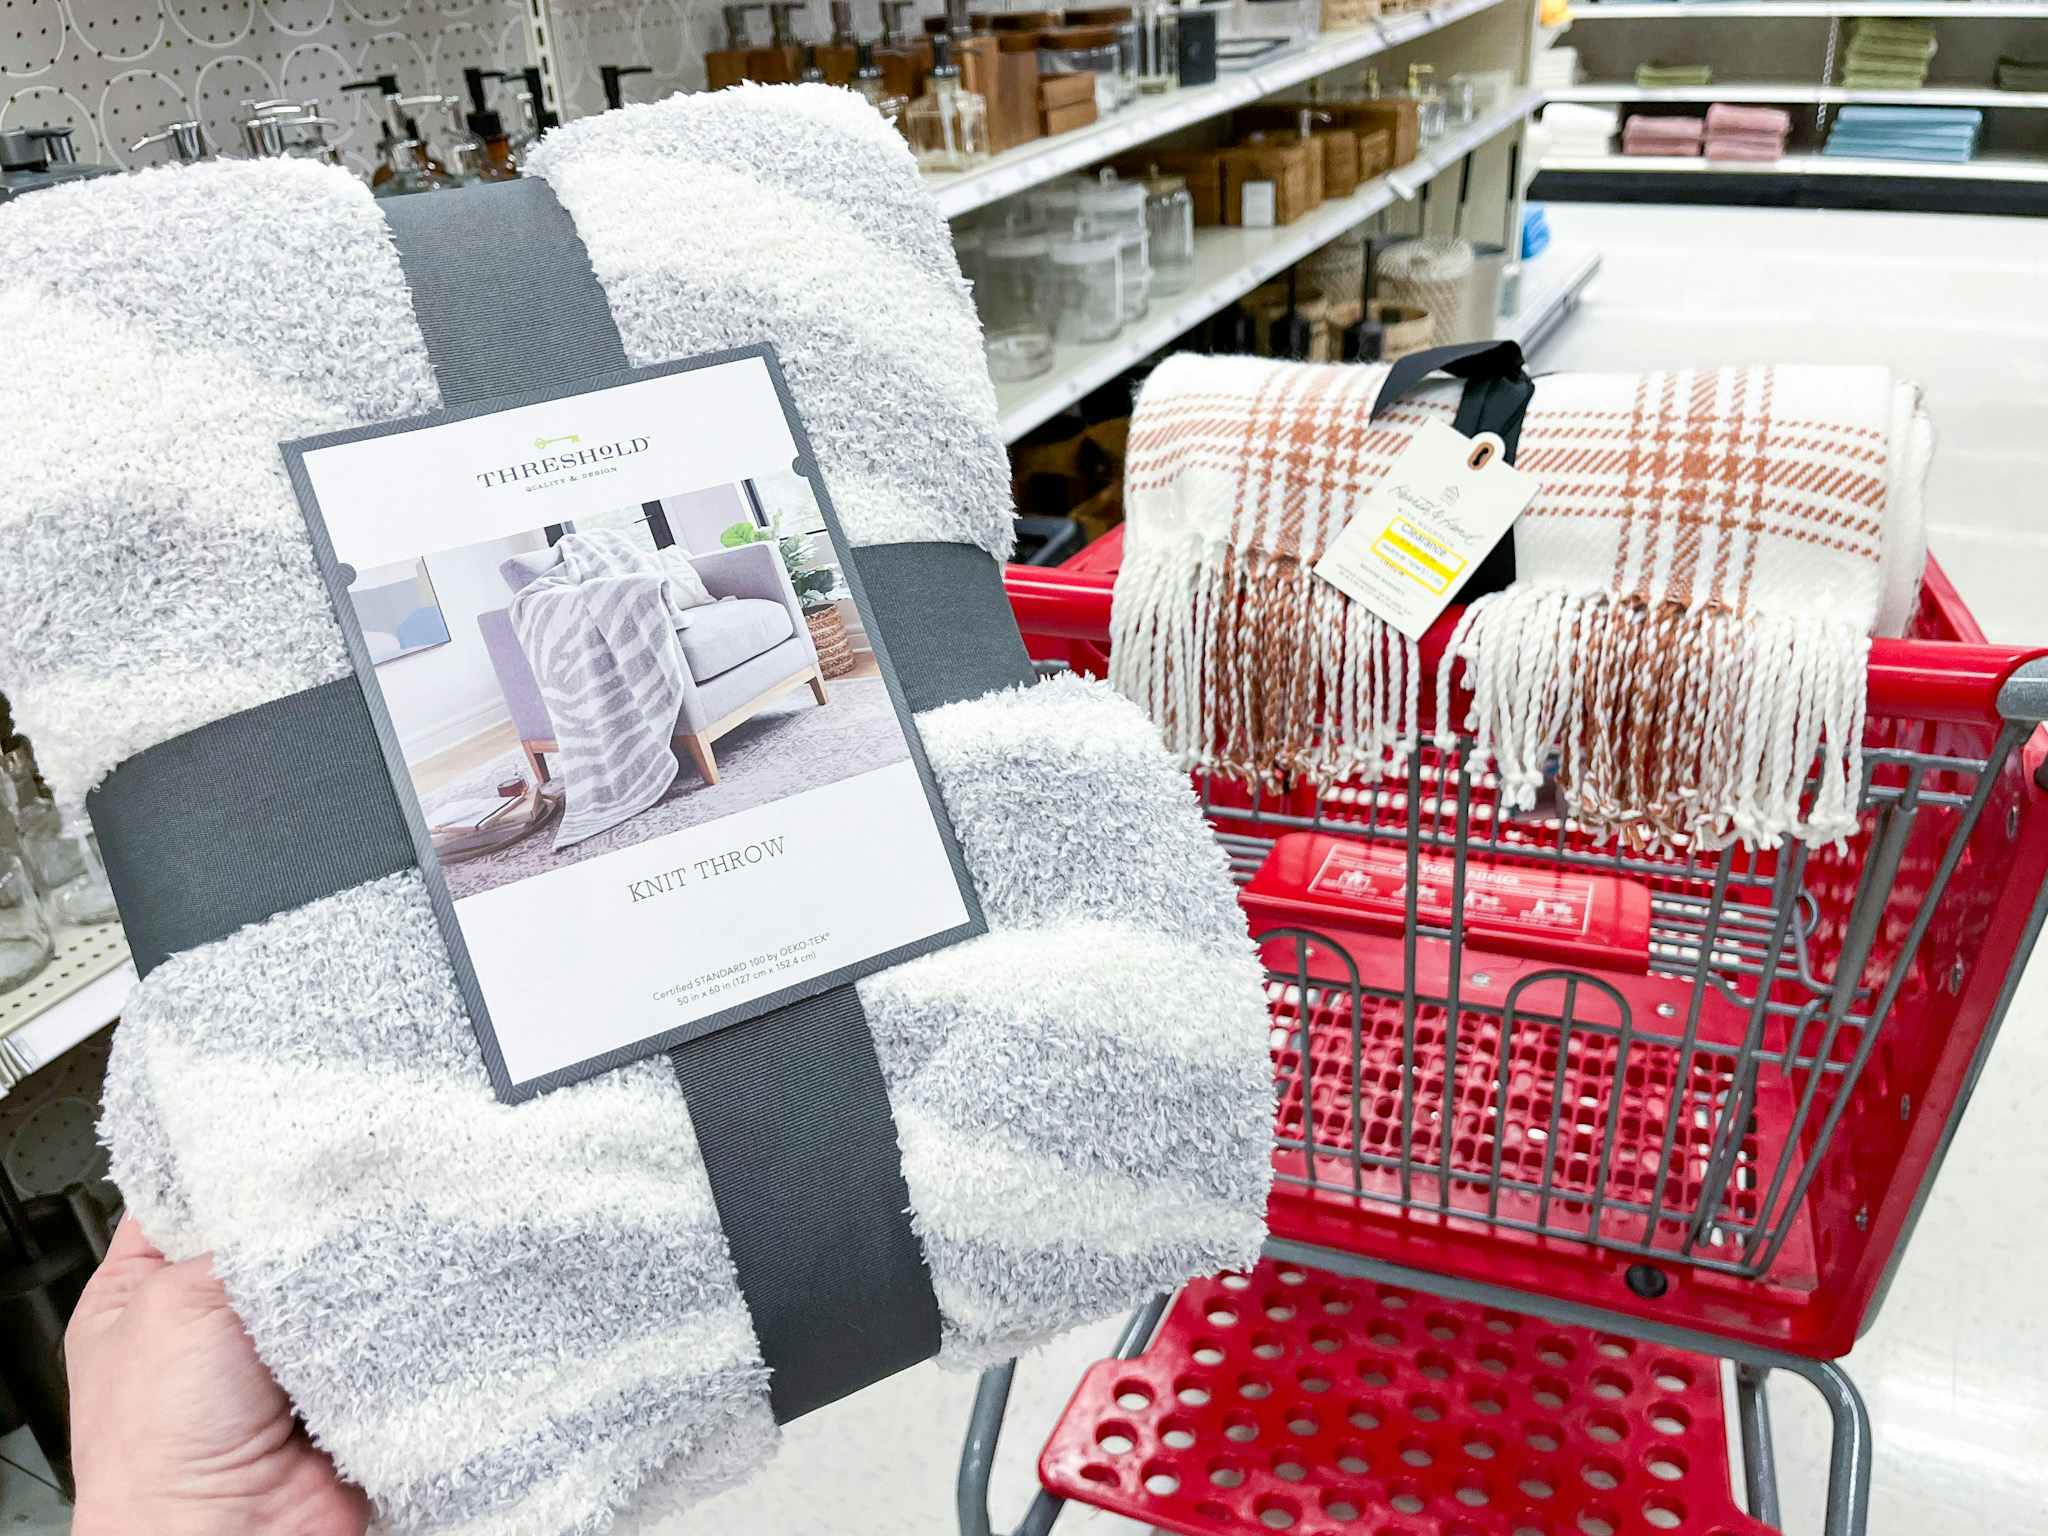 Home Clearance Finds at Target: $4 Magnolia Basket, $37 TV Stand, and More